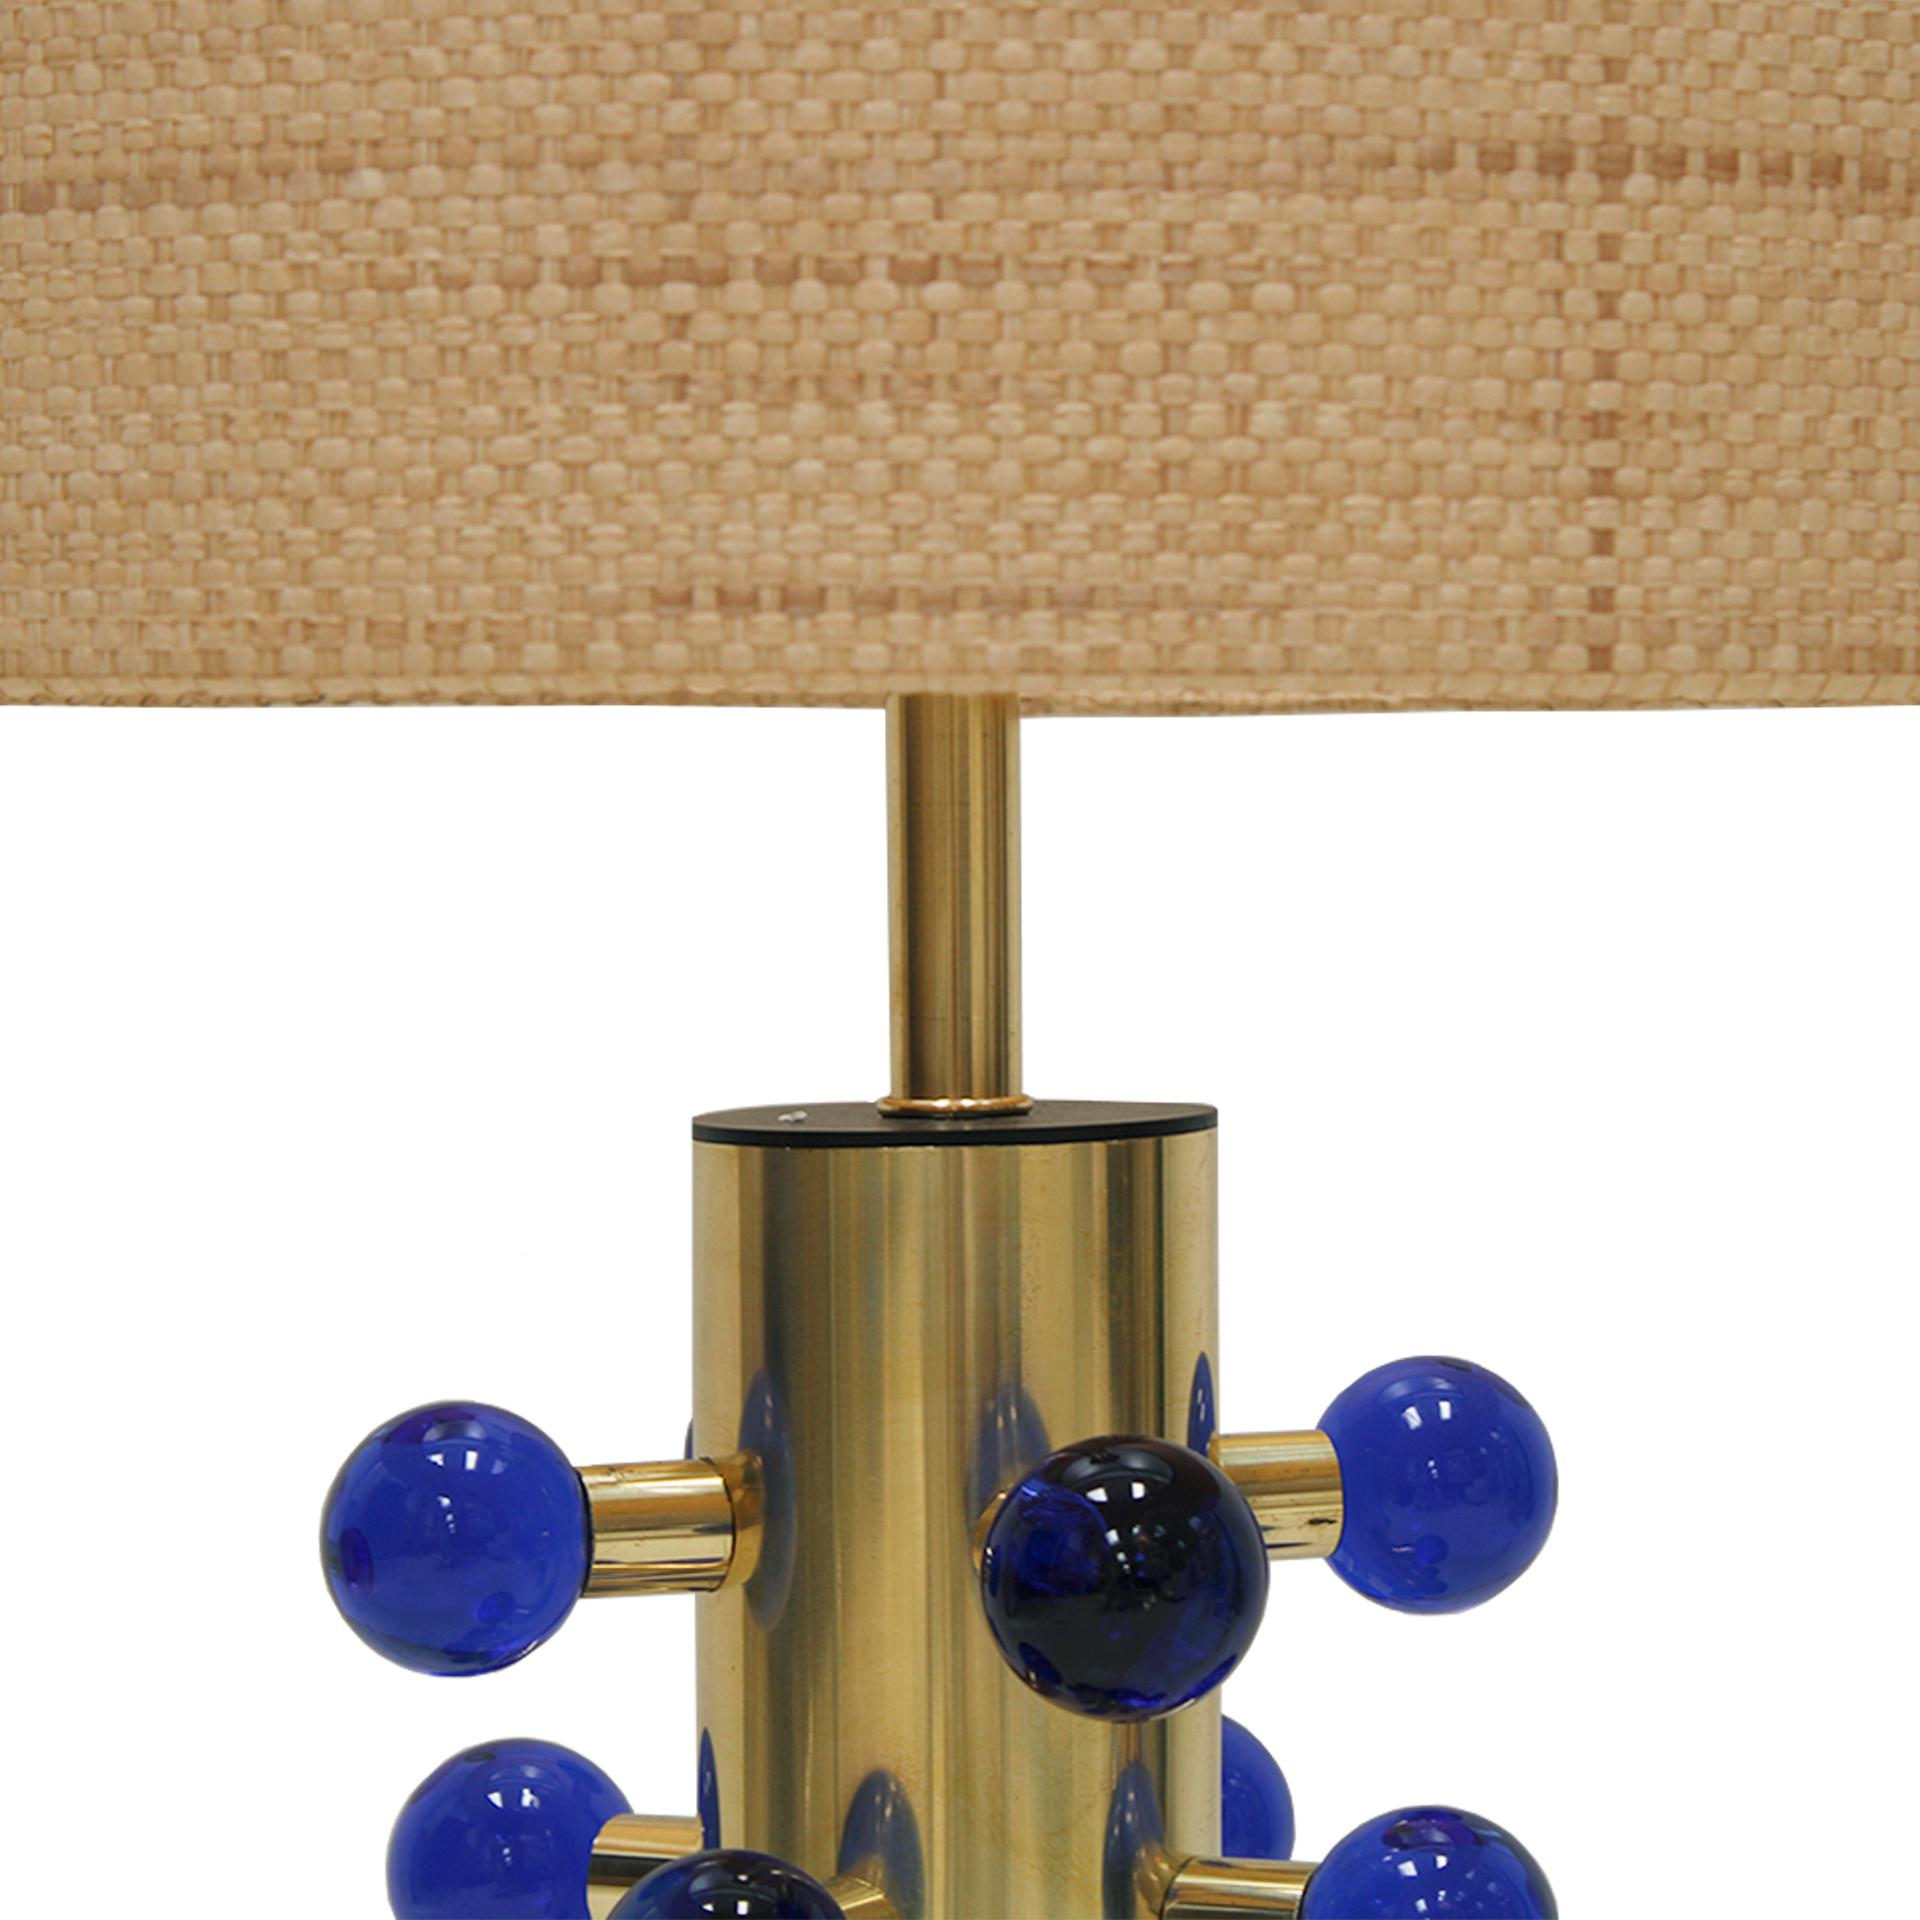 L.A. Studio Contemporary Modern Murano Glass and Brass Pair of Table Lamps In Good Condition For Sale In Ibiza, Spain